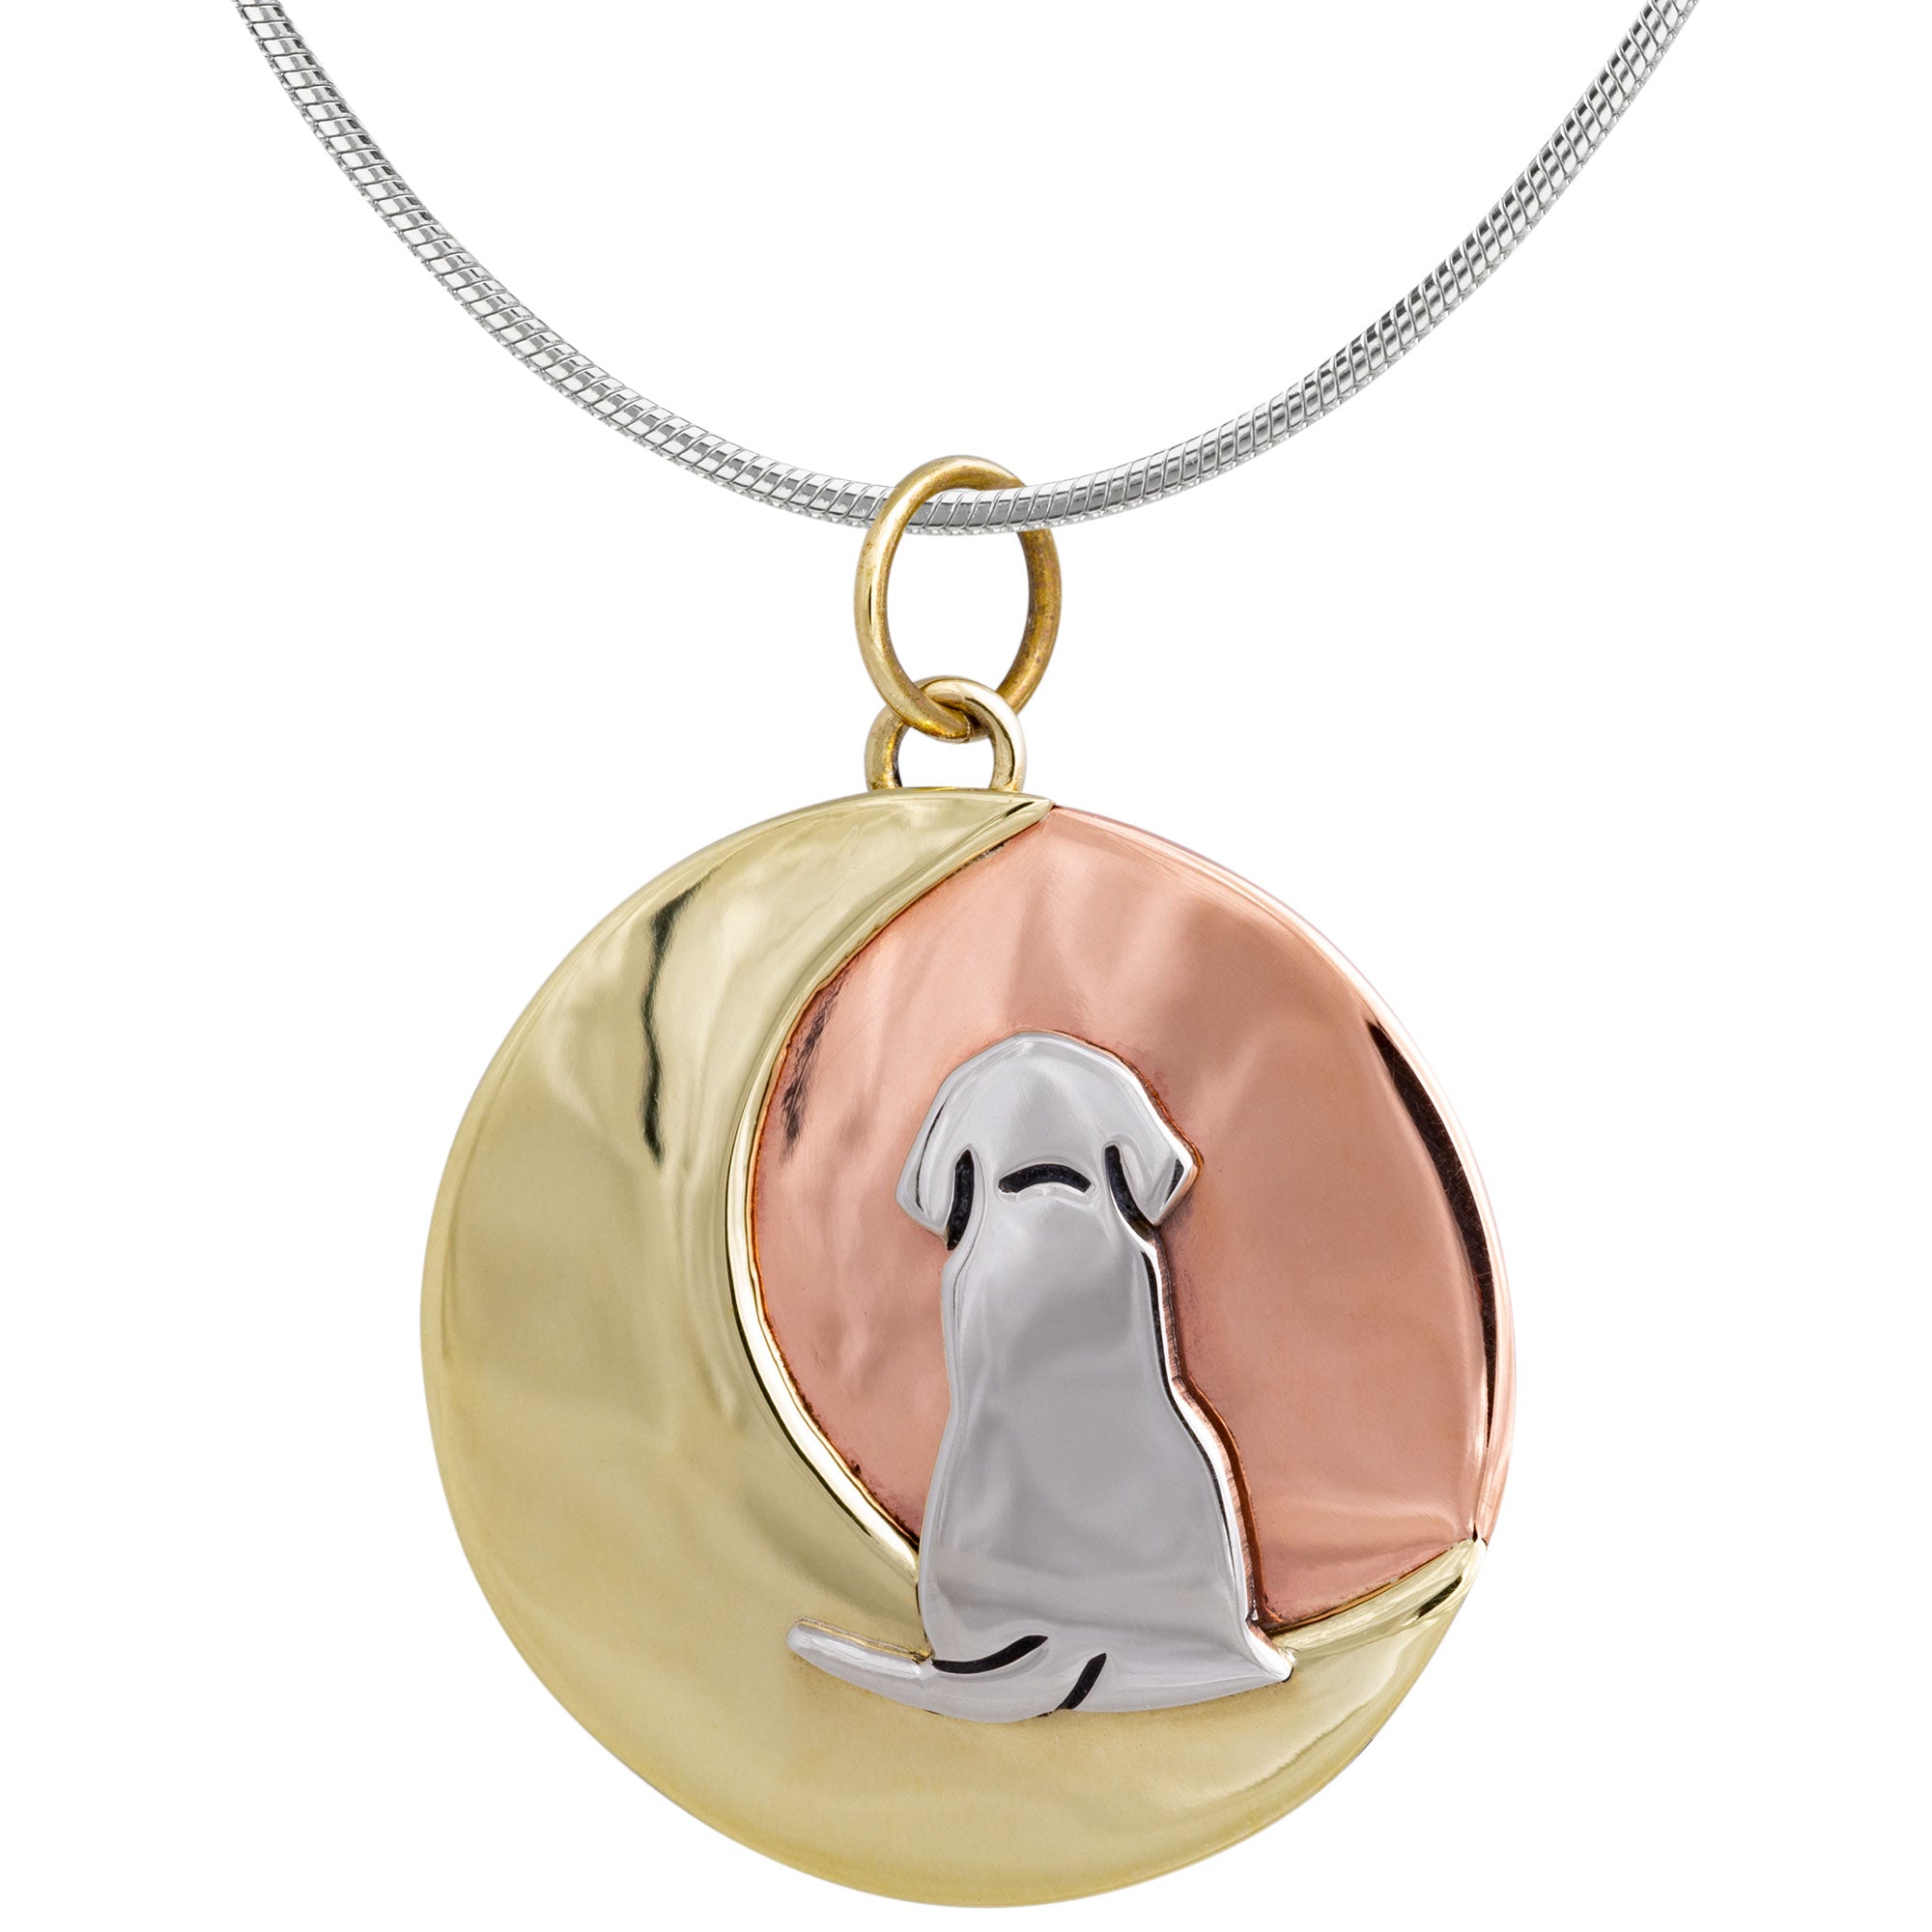 Moonlight Dog Necklace - With Silver Plated Chain